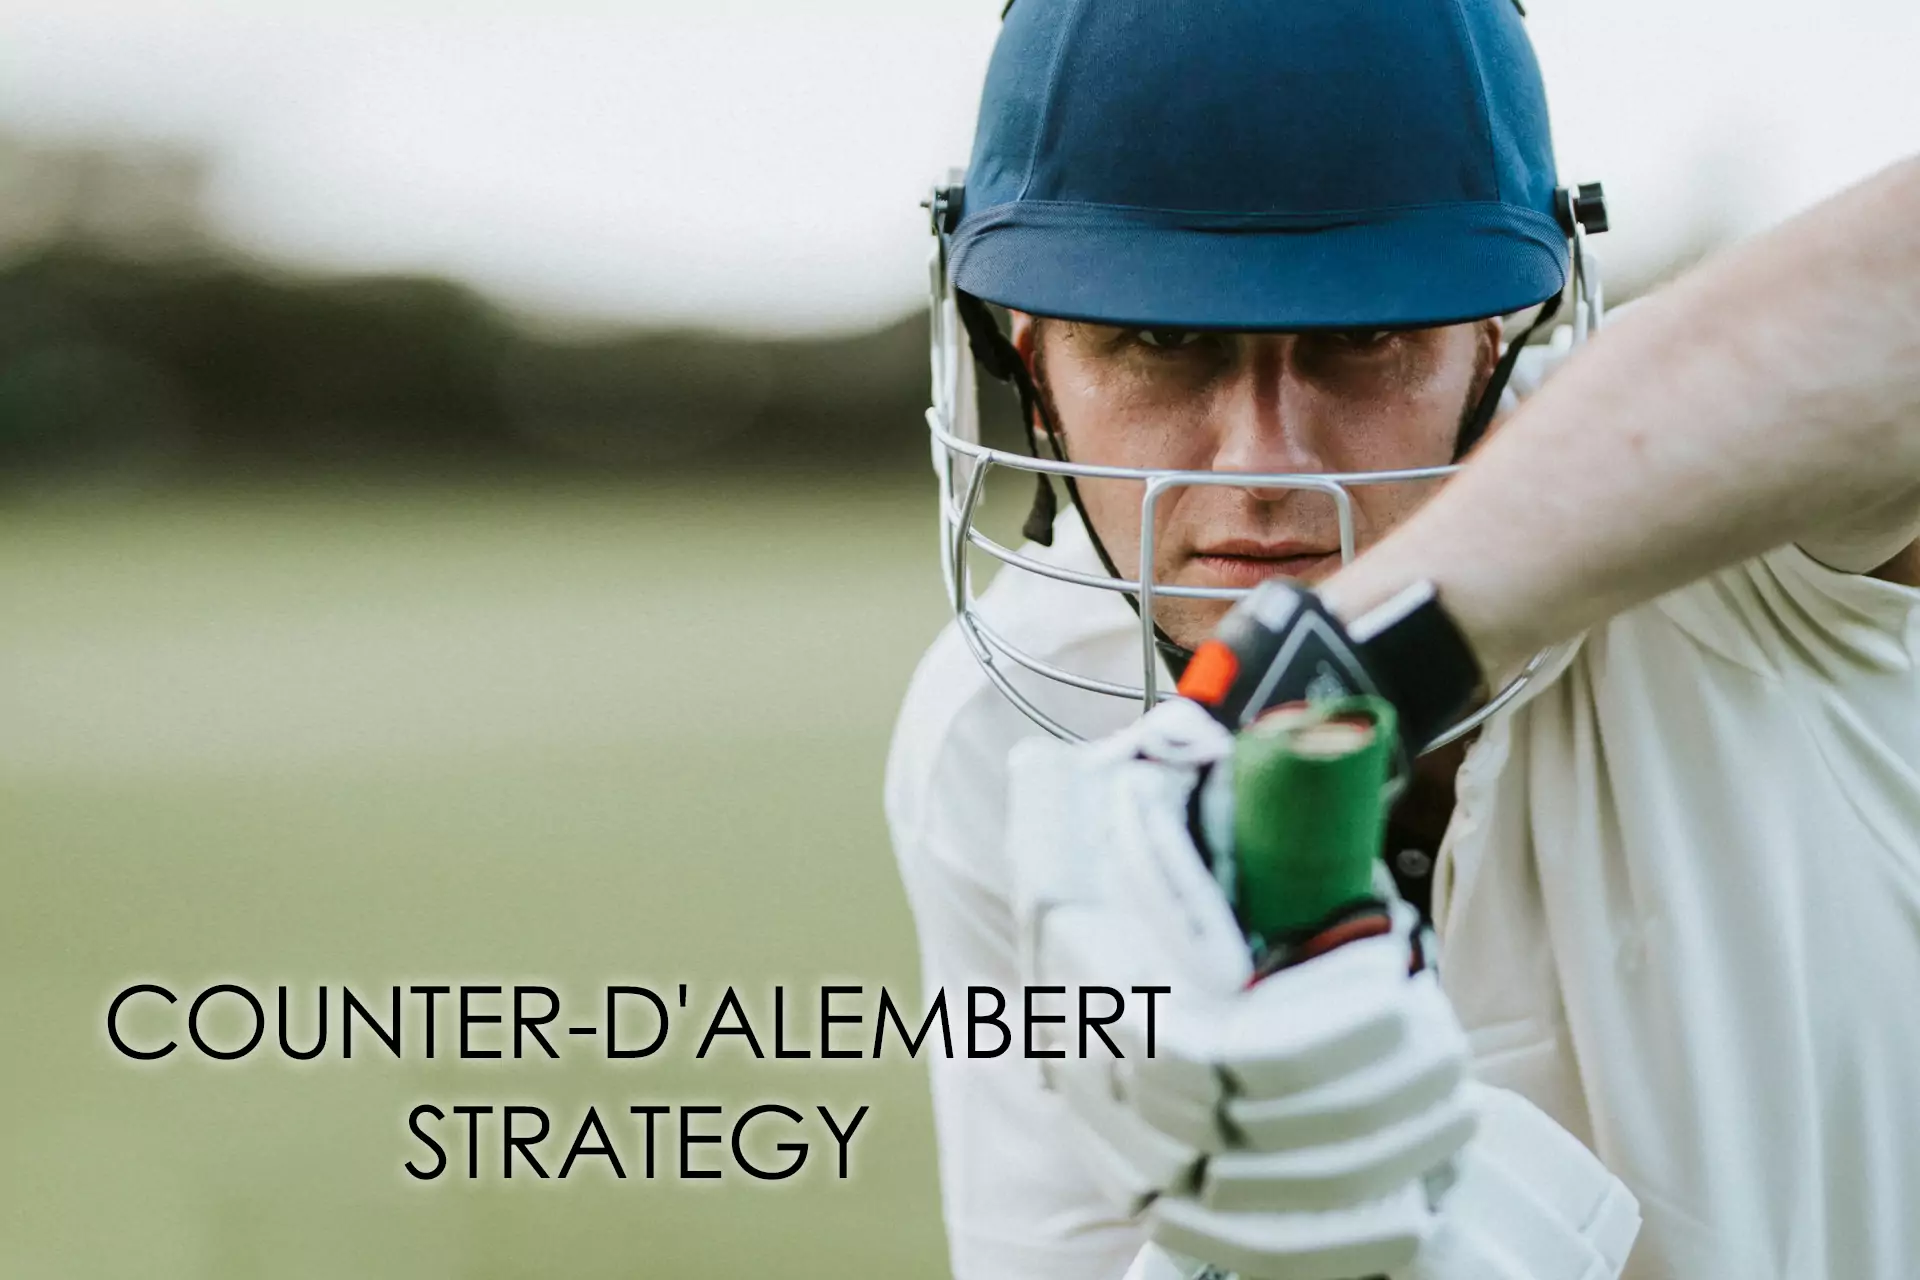 The Counter-d&#039;Alembert Strategy can be a solution for live cricket betting.